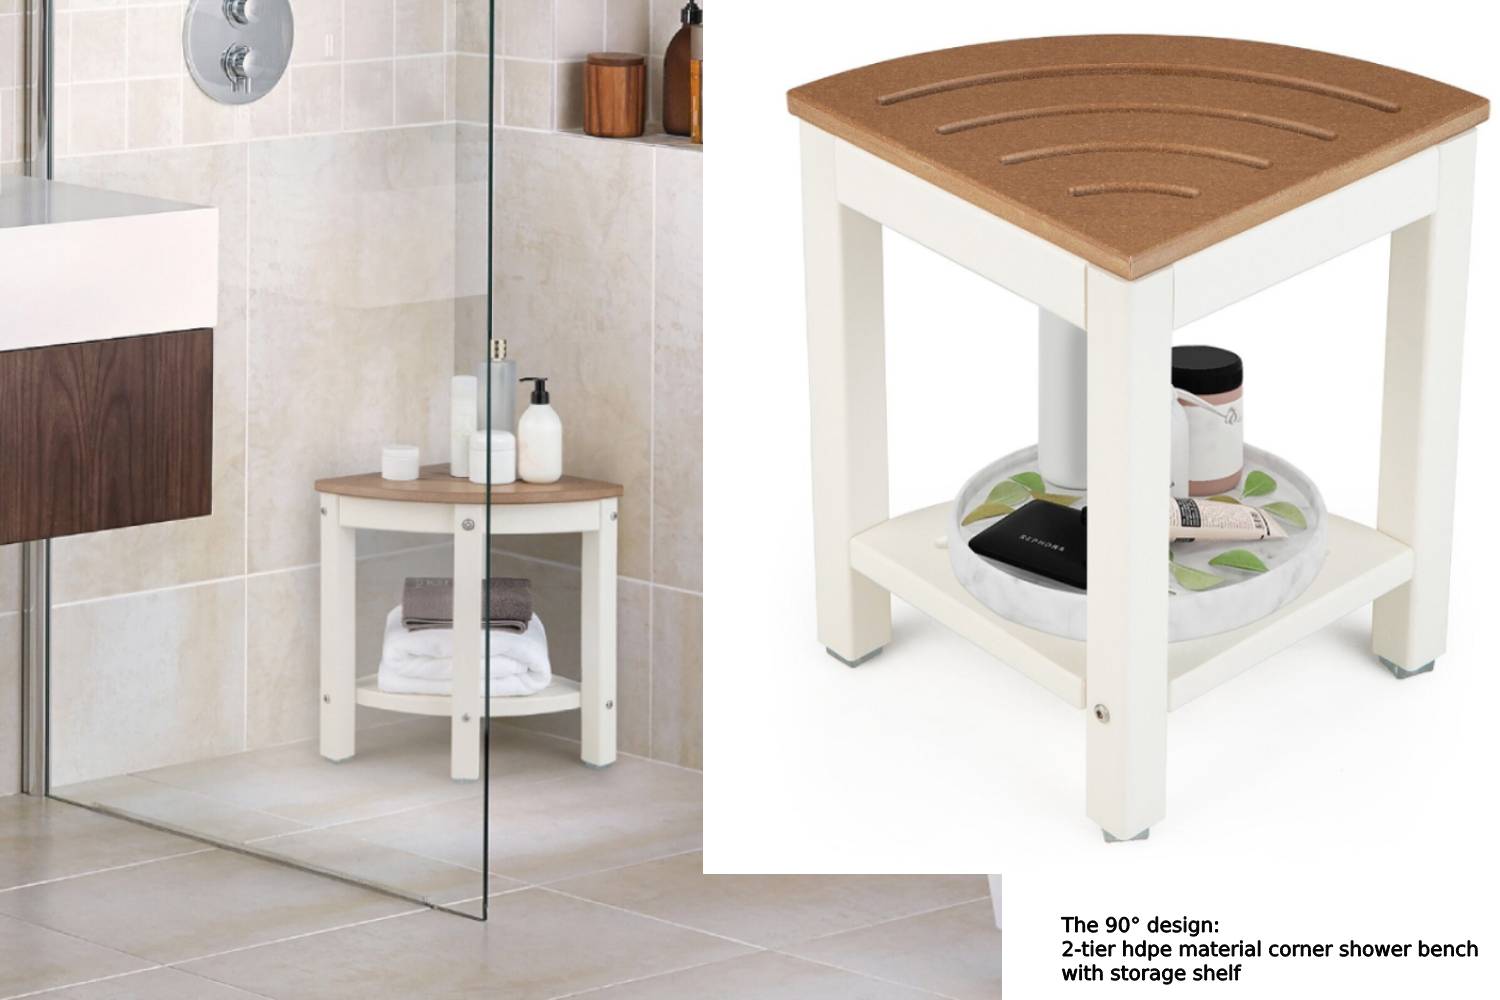 the 90 design 2 tier hdpe material corner shower bench with storage shelf